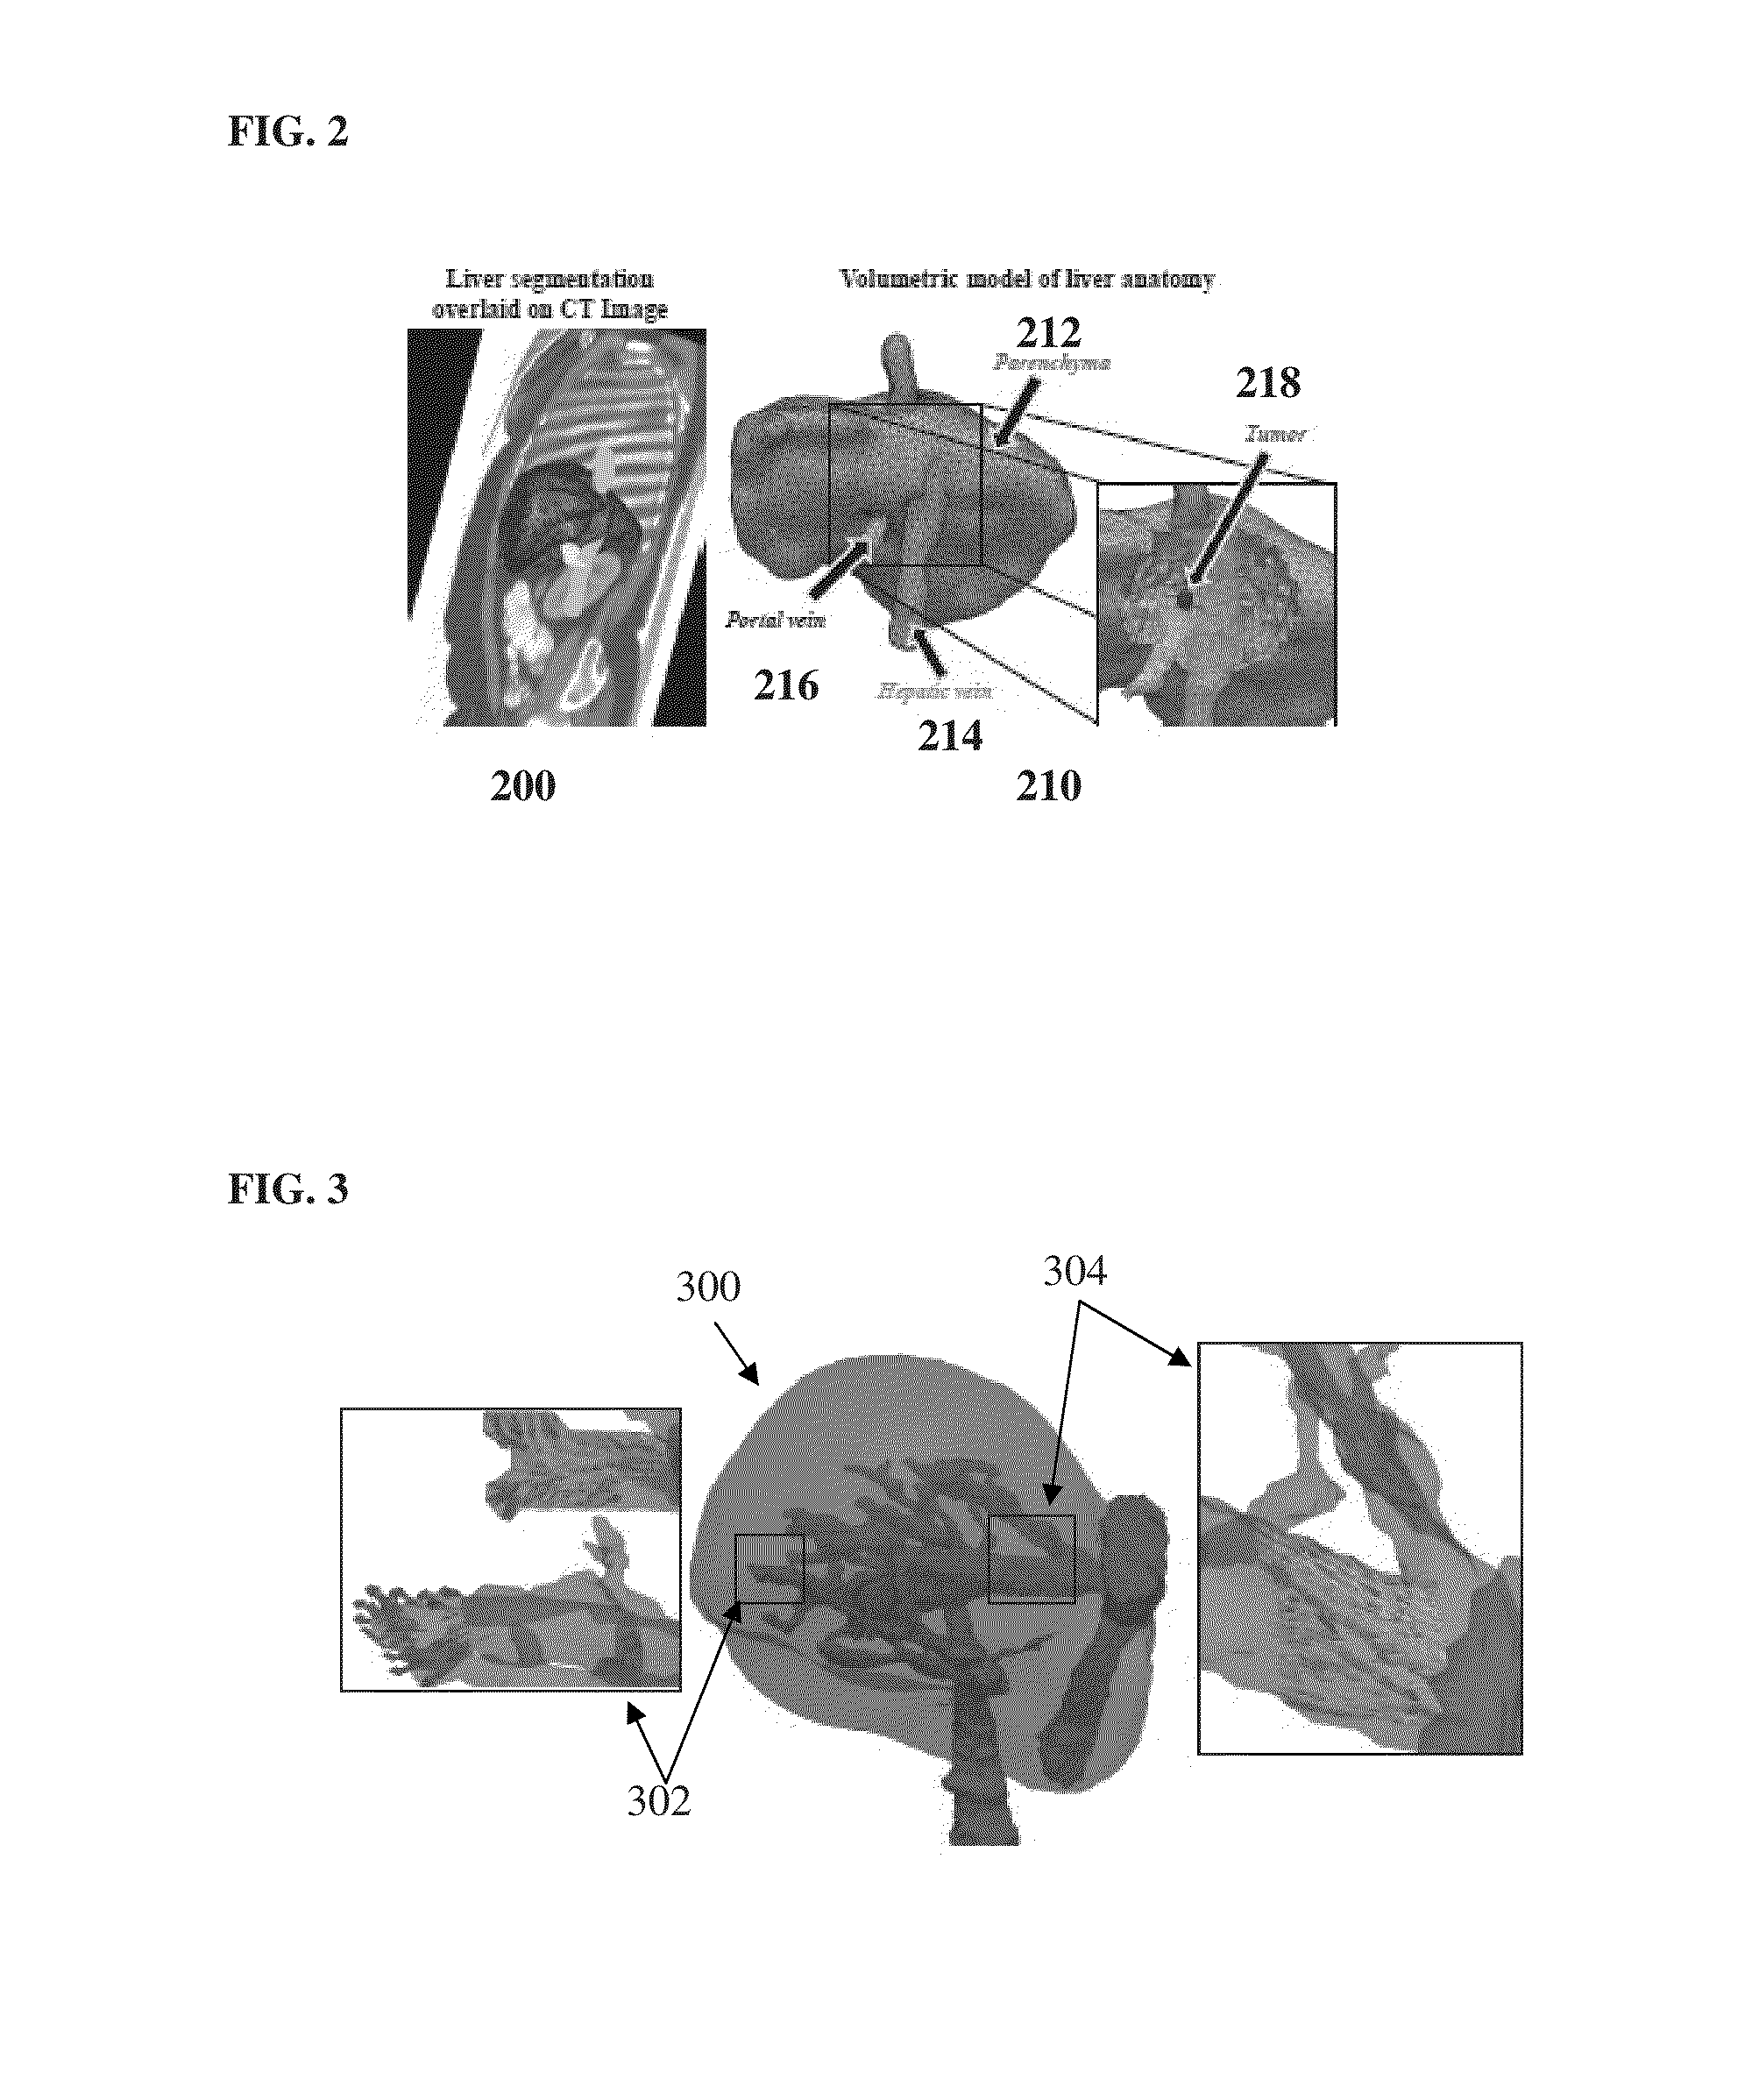 System and Method for Personalized Computation of Tissue Ablation Extent Based on Medical Images